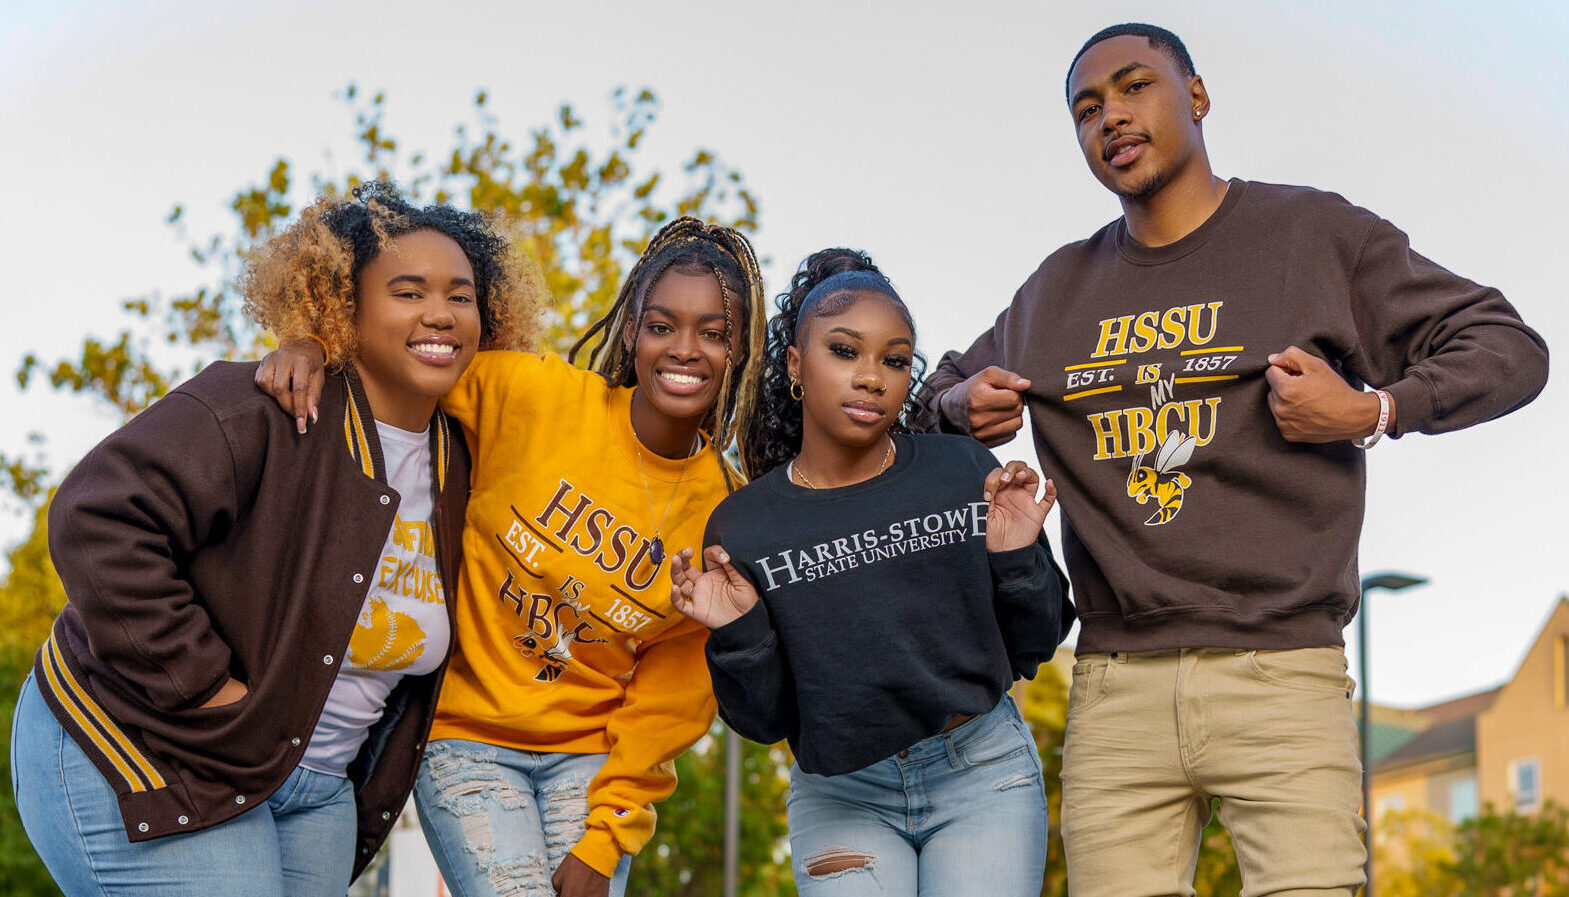 St Louis Harris Stowe State University Delivers Hbcu Excellence Here At Home Welcome To The 4152